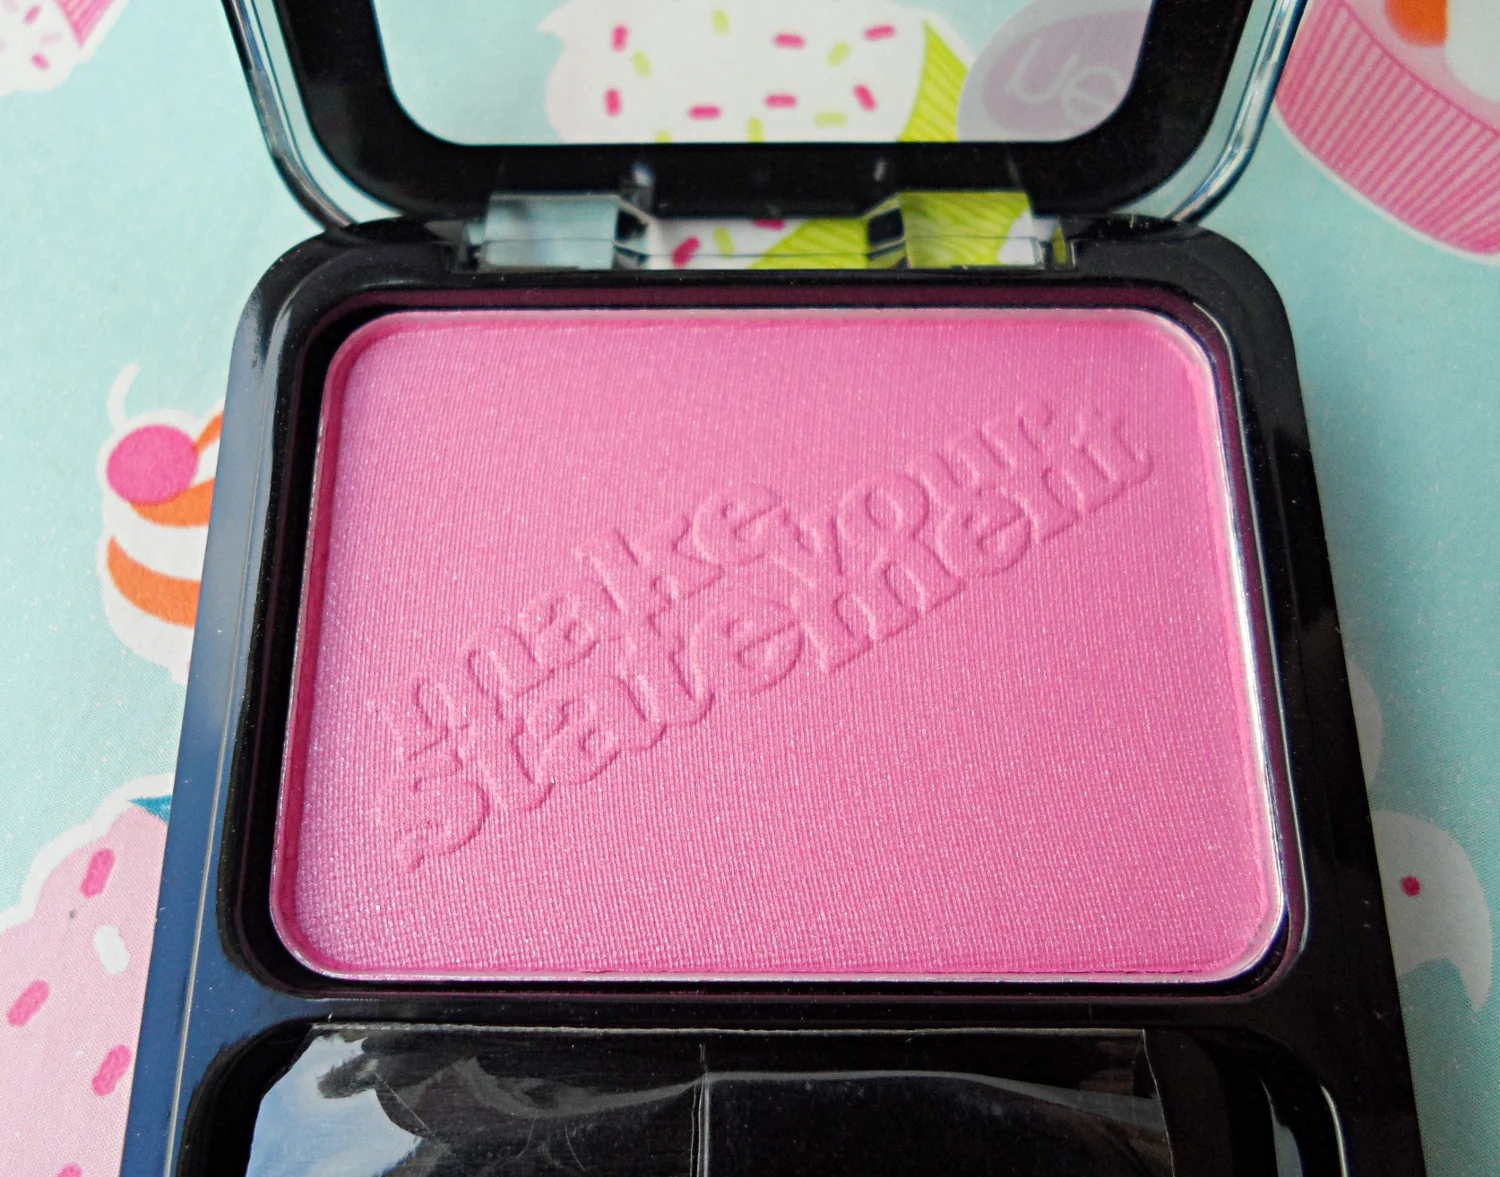 Beauty UK cosmetics review Beauty UK Blush & Brush Review and Swatches by blogger